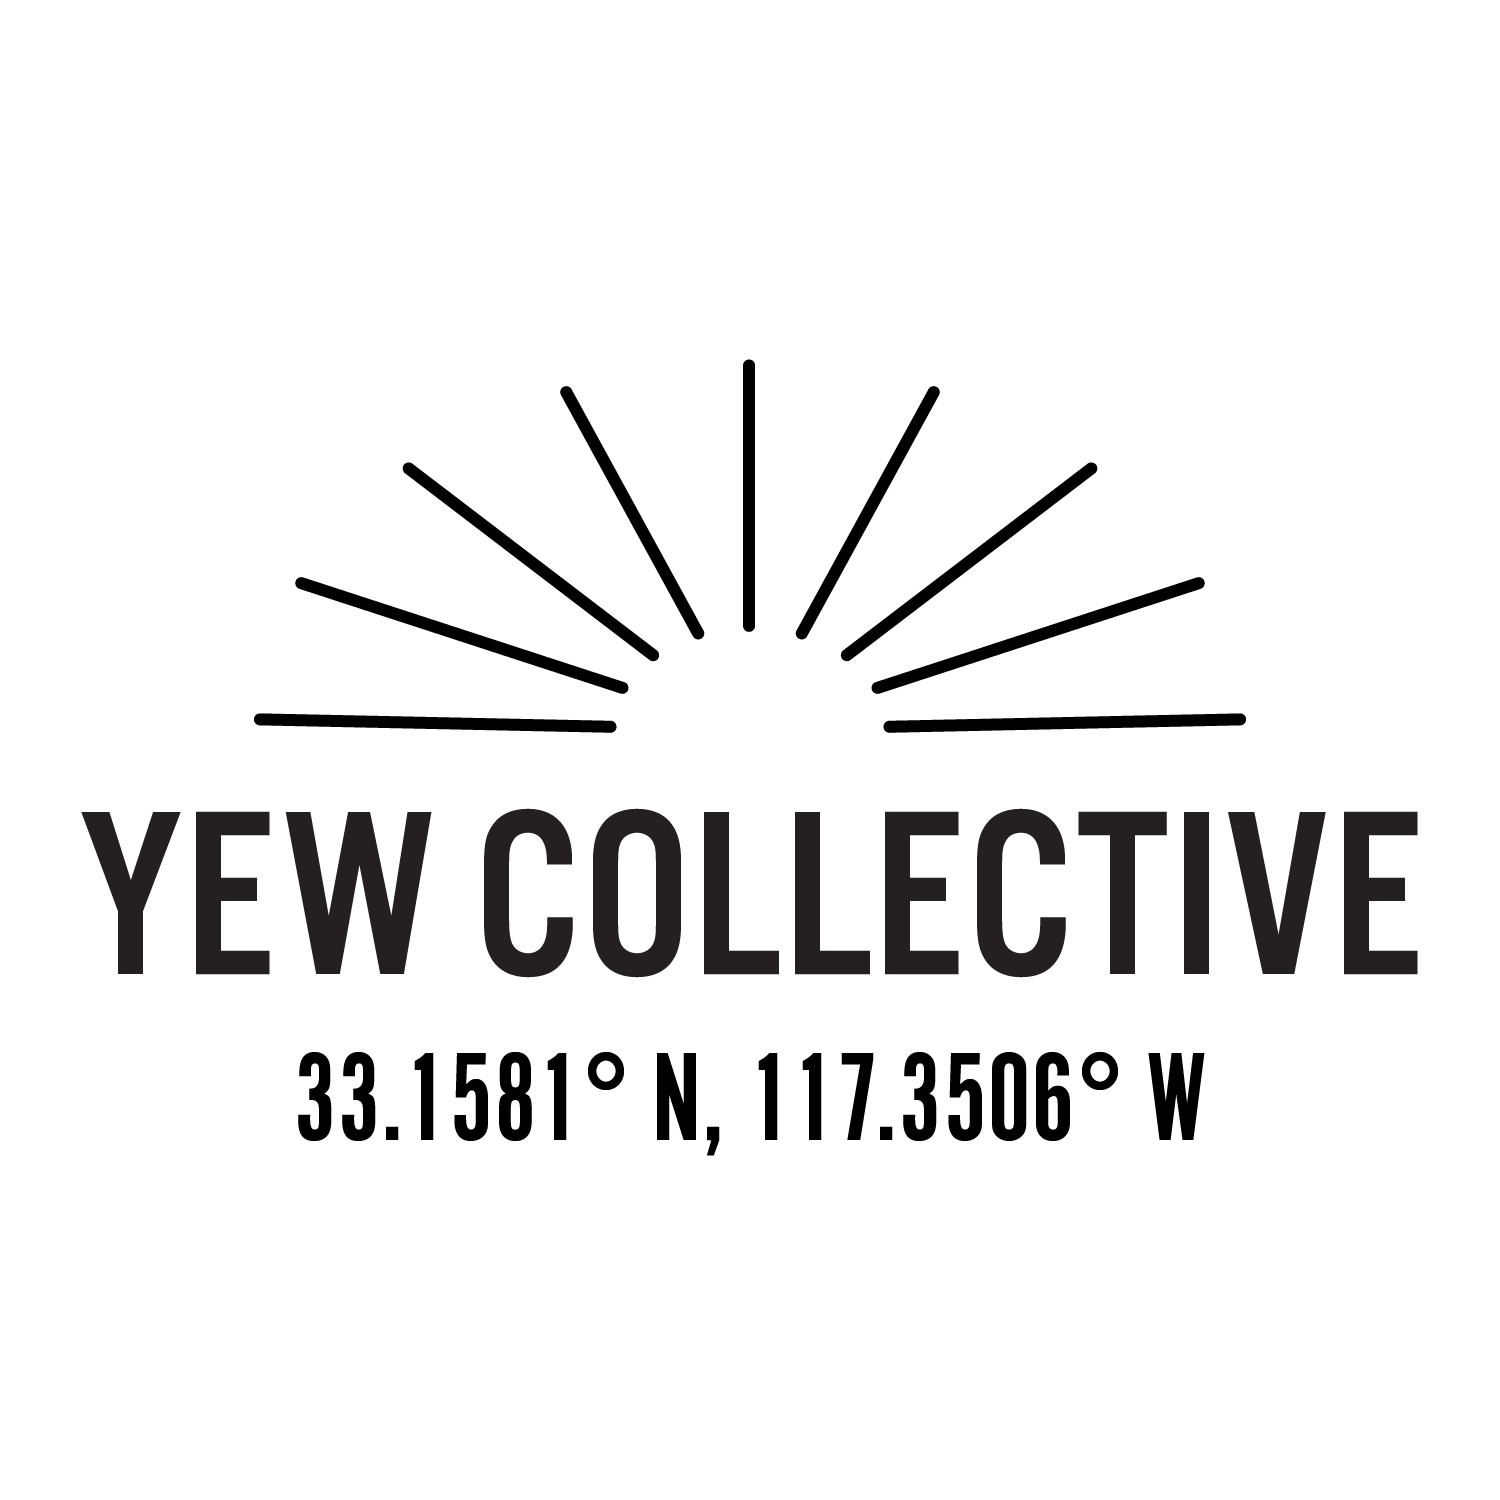 YEW COLLECTIVE